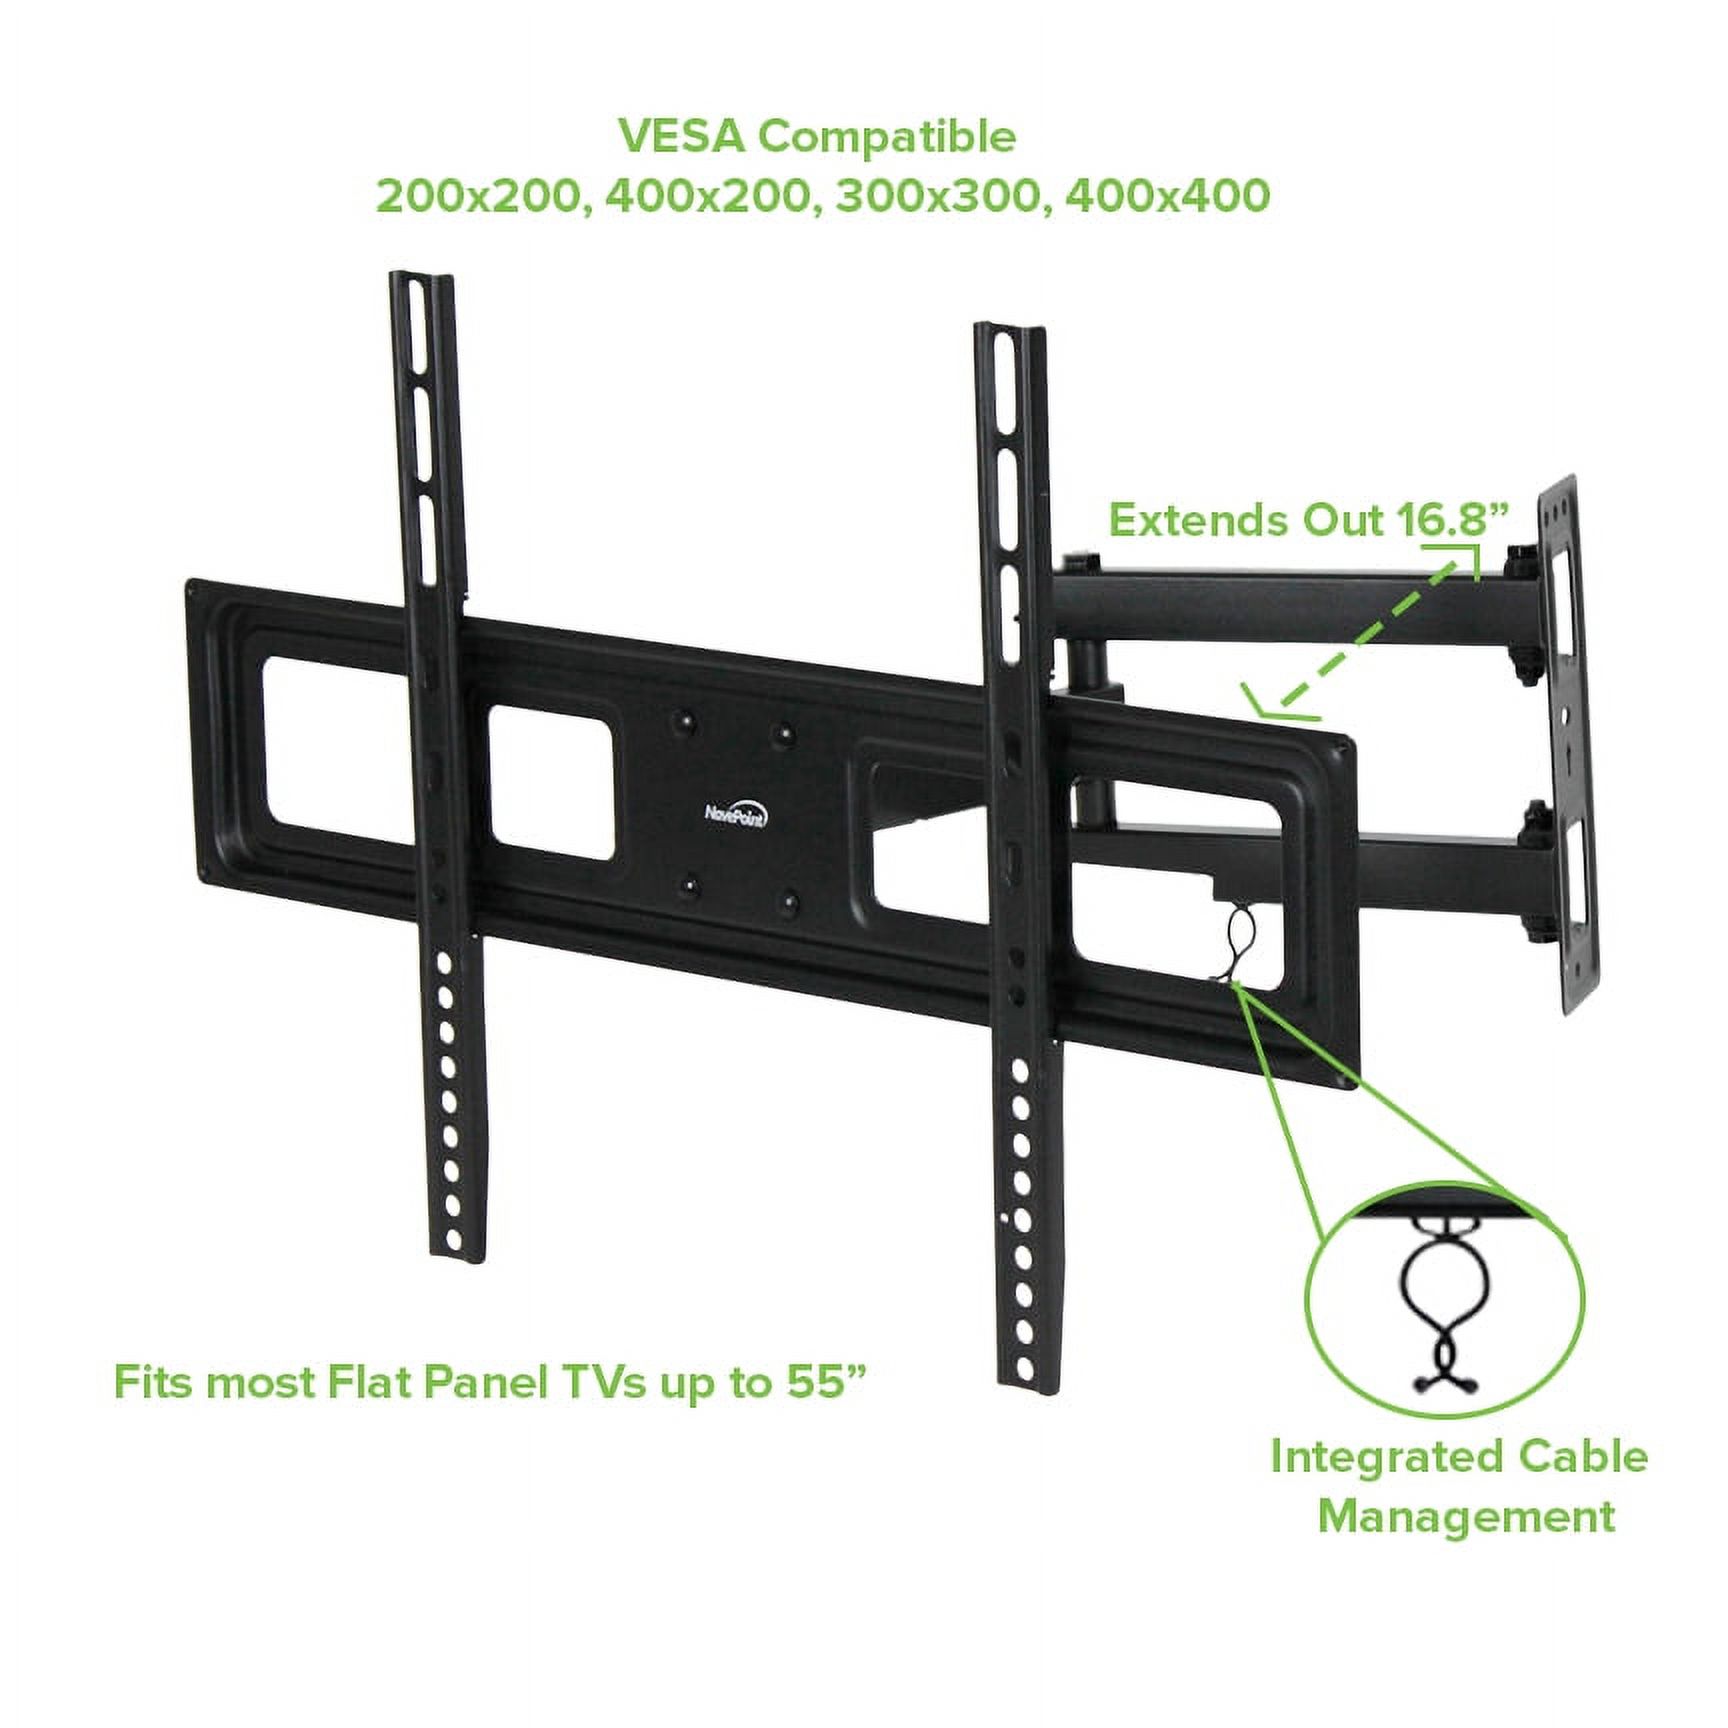 NavePoint Articulating Corner Wall Mount Bracket WithTilt Swivel For LED LCD Plasma Flat Screen TV From 32-55 Inches Black - image 4 of 6